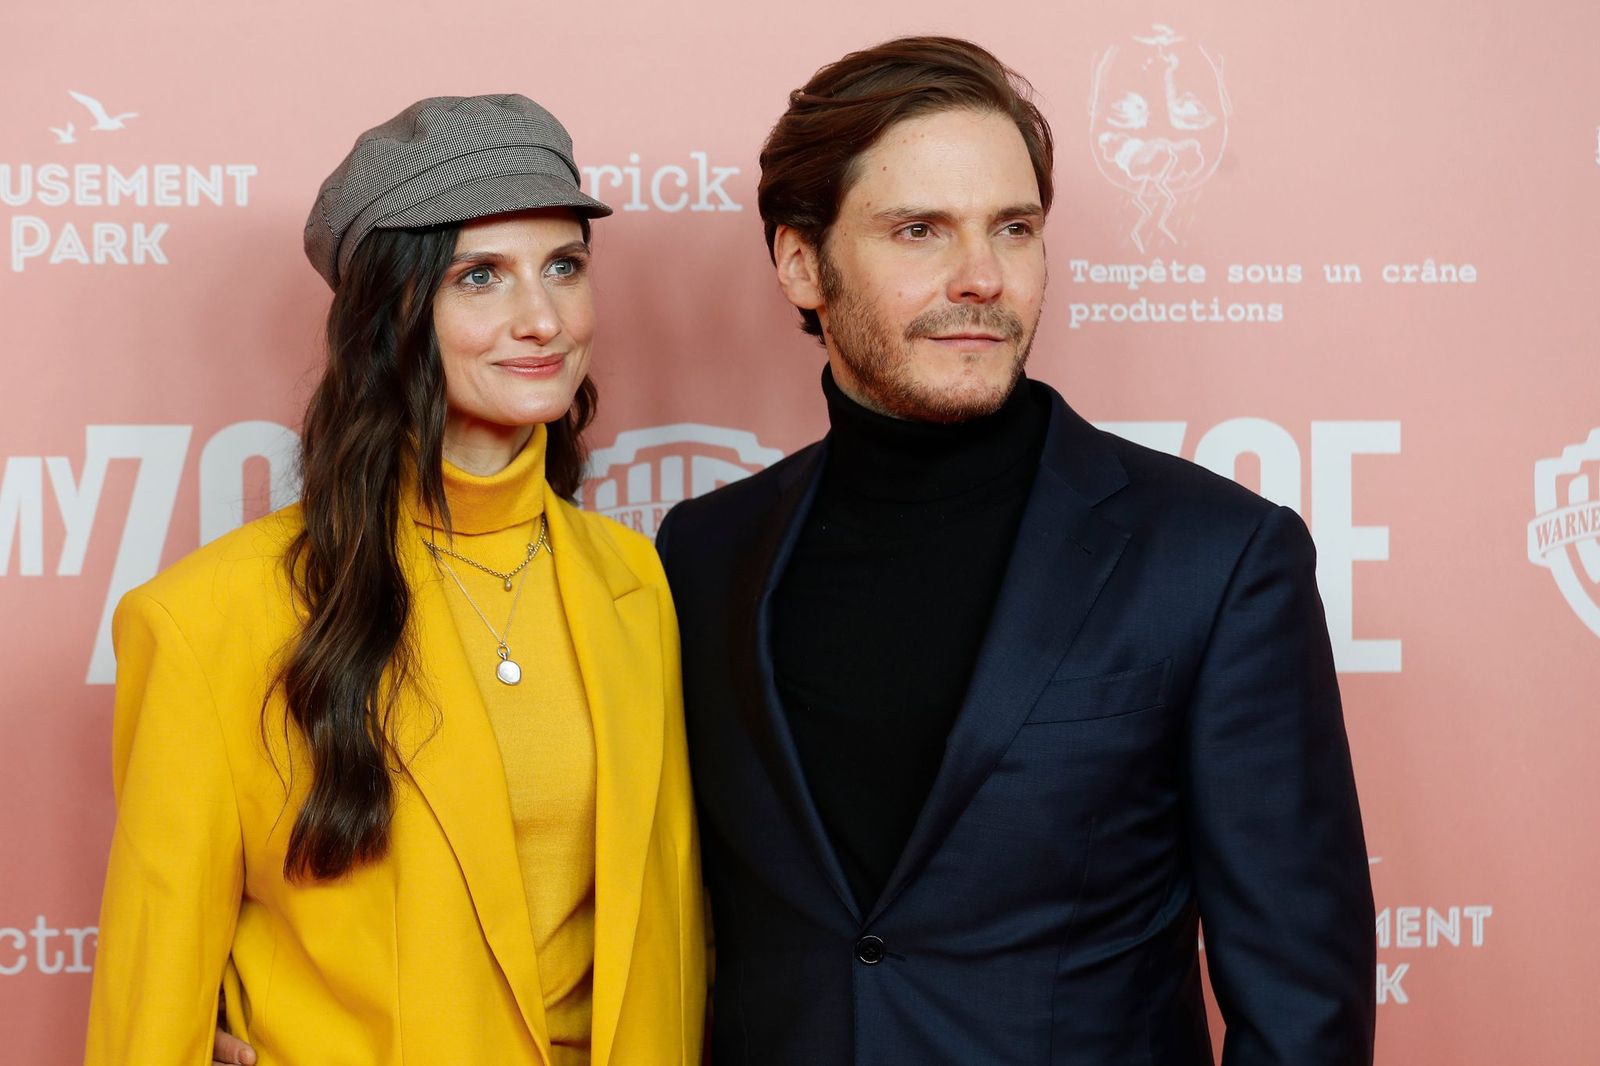 Felicitas Rombold and Daniel Bruehl at the "My Zoe" premiere at Kino International on November 5, 2019 | Photo: Getty Images